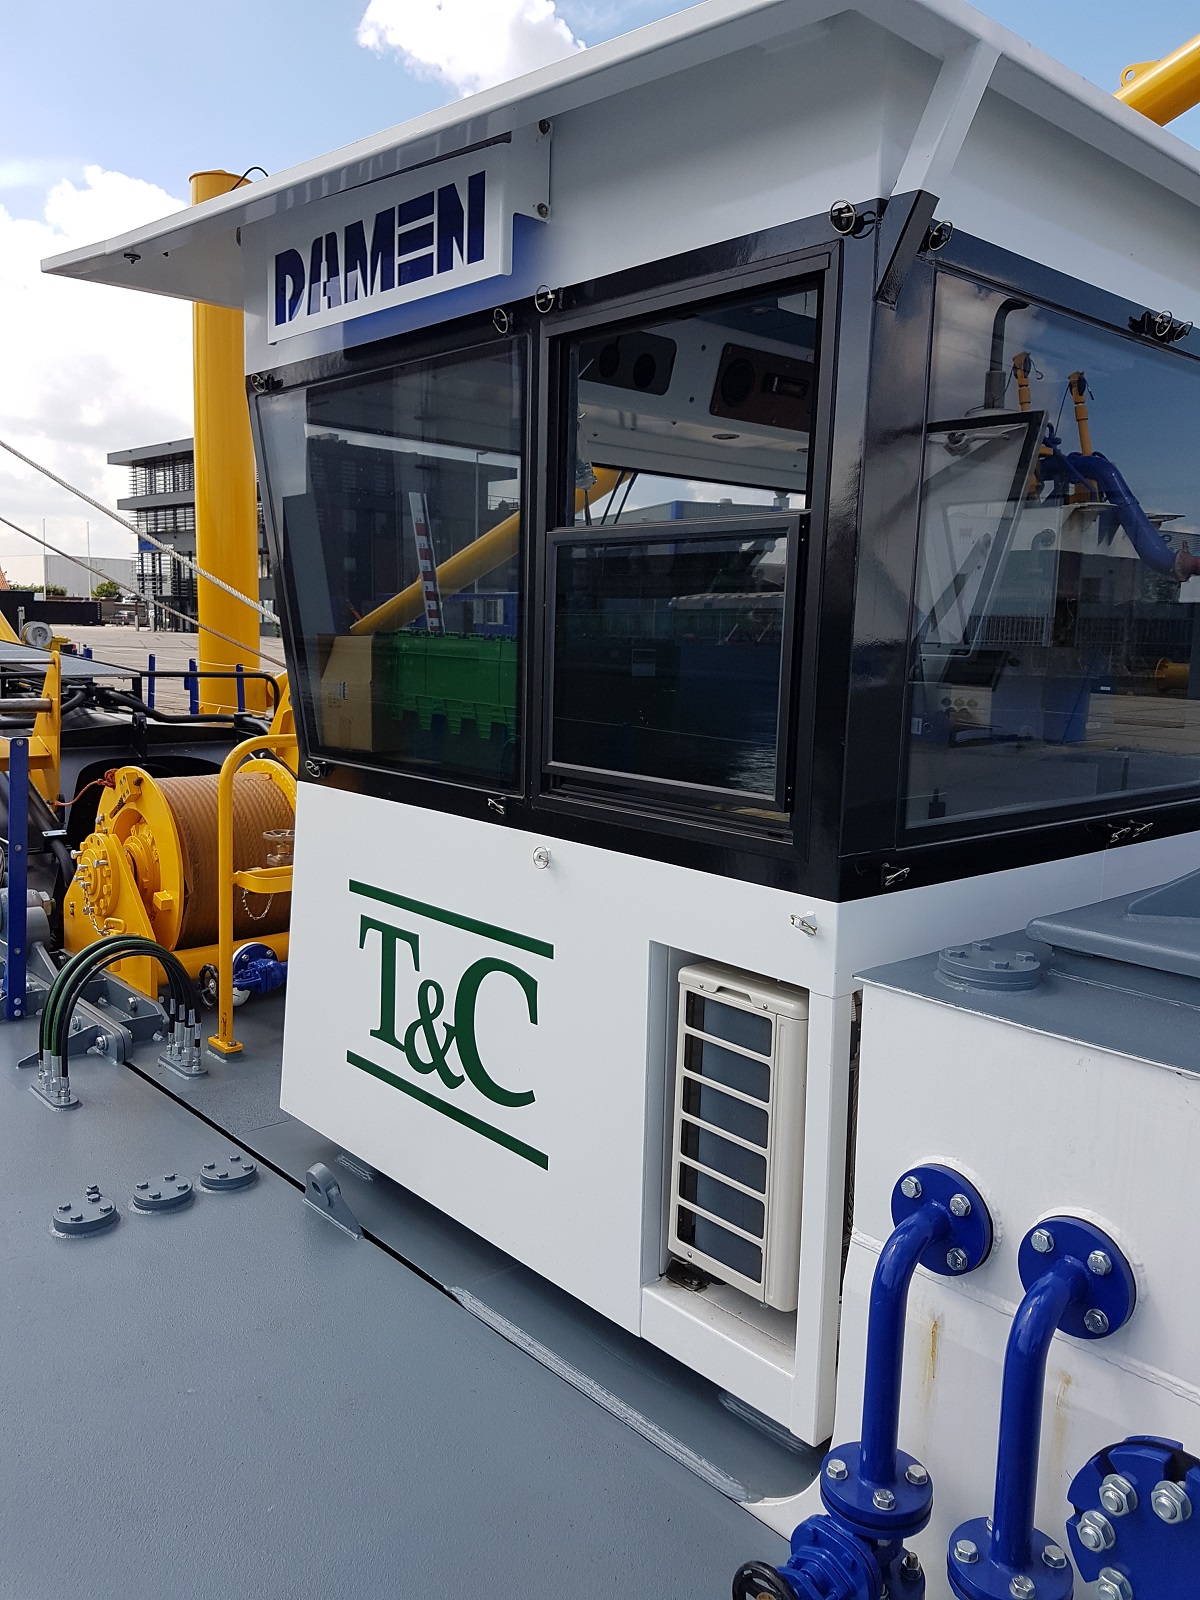 3 Damen contracted to deliver cutter suction dredger to TC in Paraguay